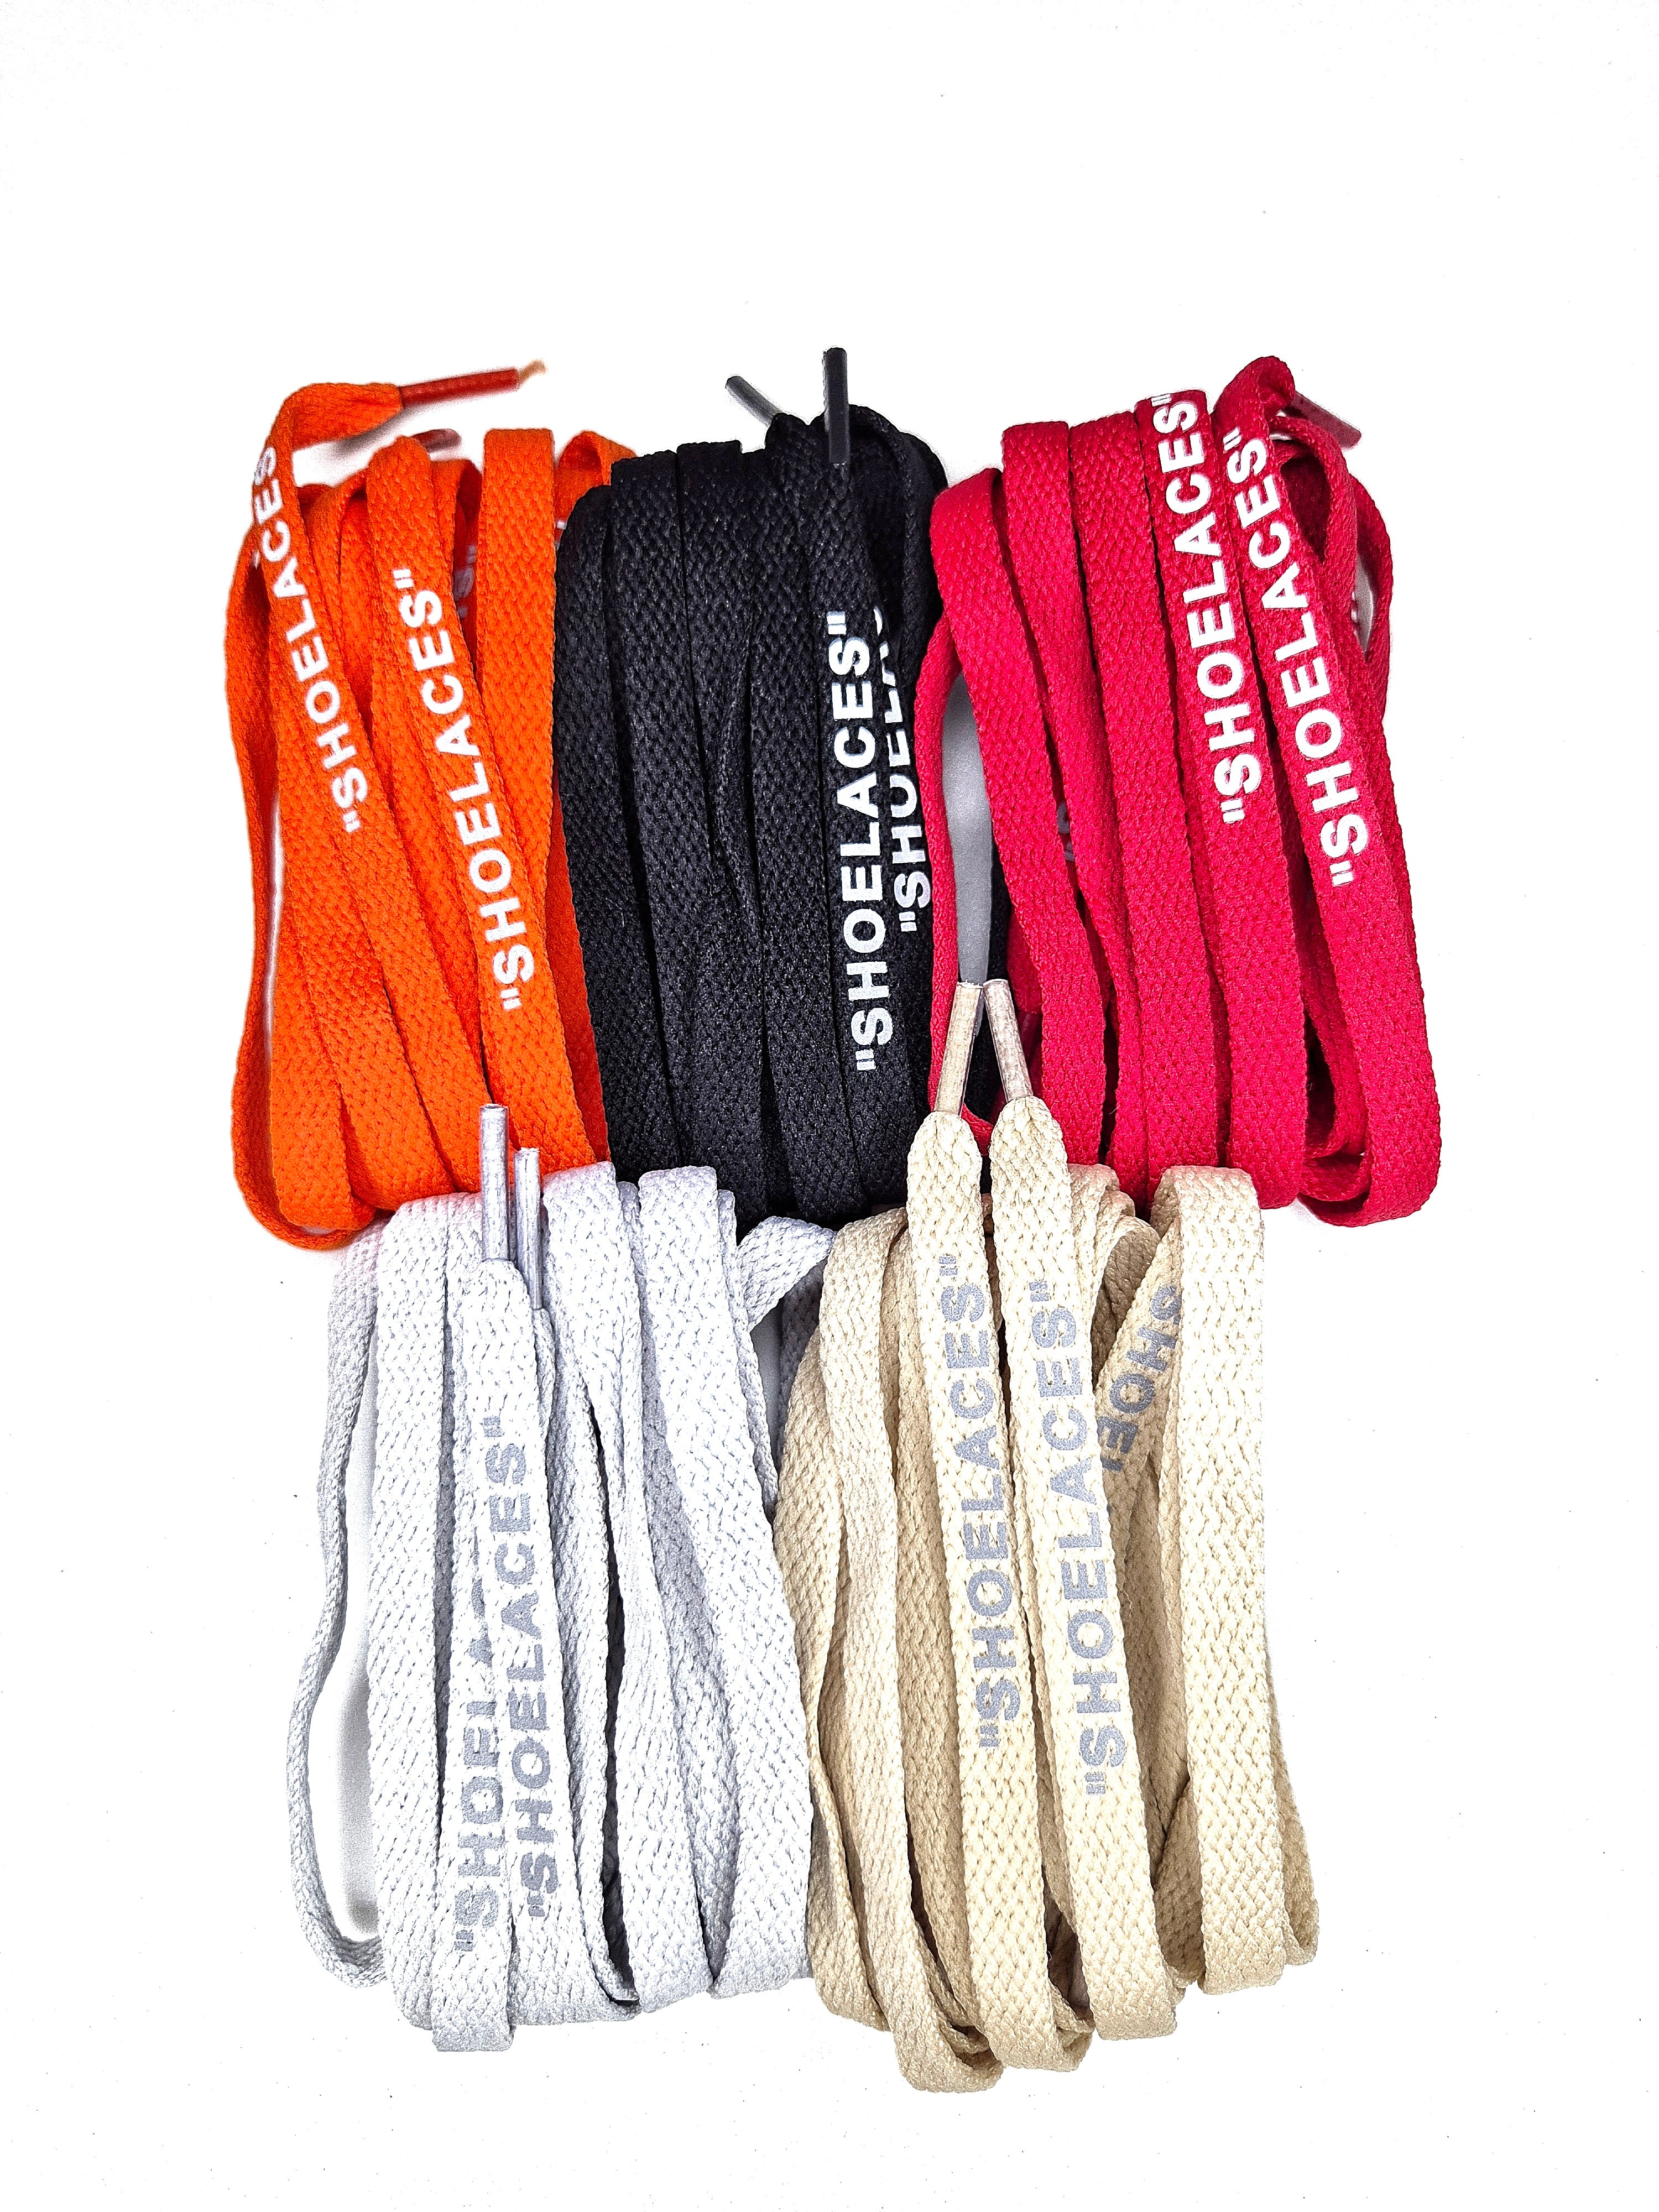 Off-White Style"Shoelace Reflective" 5 pairs Flat combo by TGLC